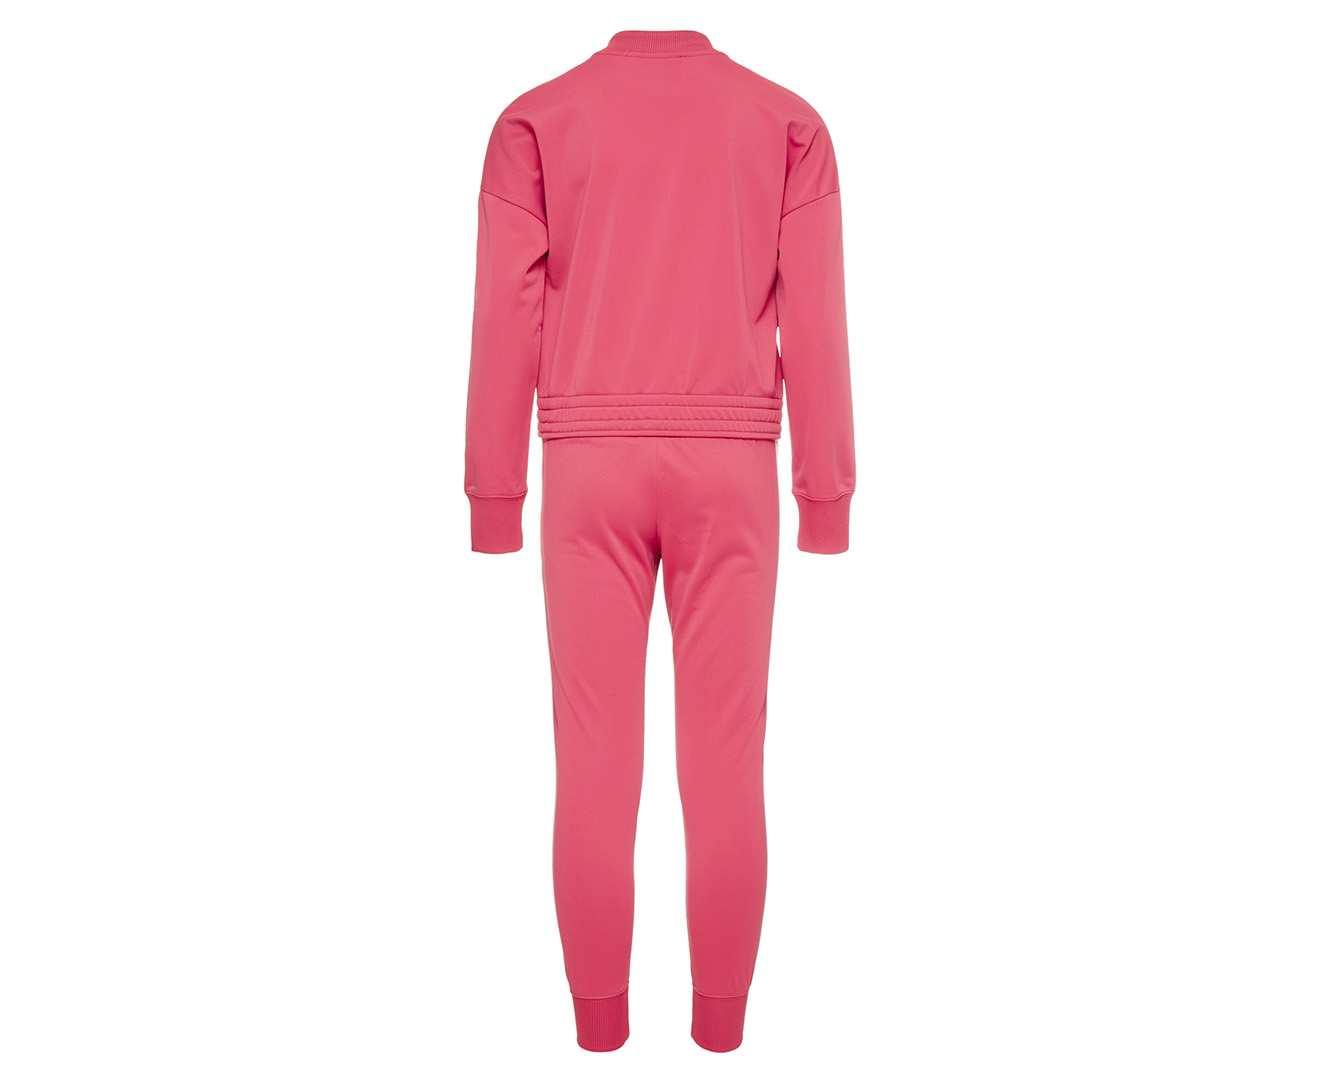 Nike Sportswear Youth Girls' Tricot Tracksuit Set - Archaeon Pink/White ...